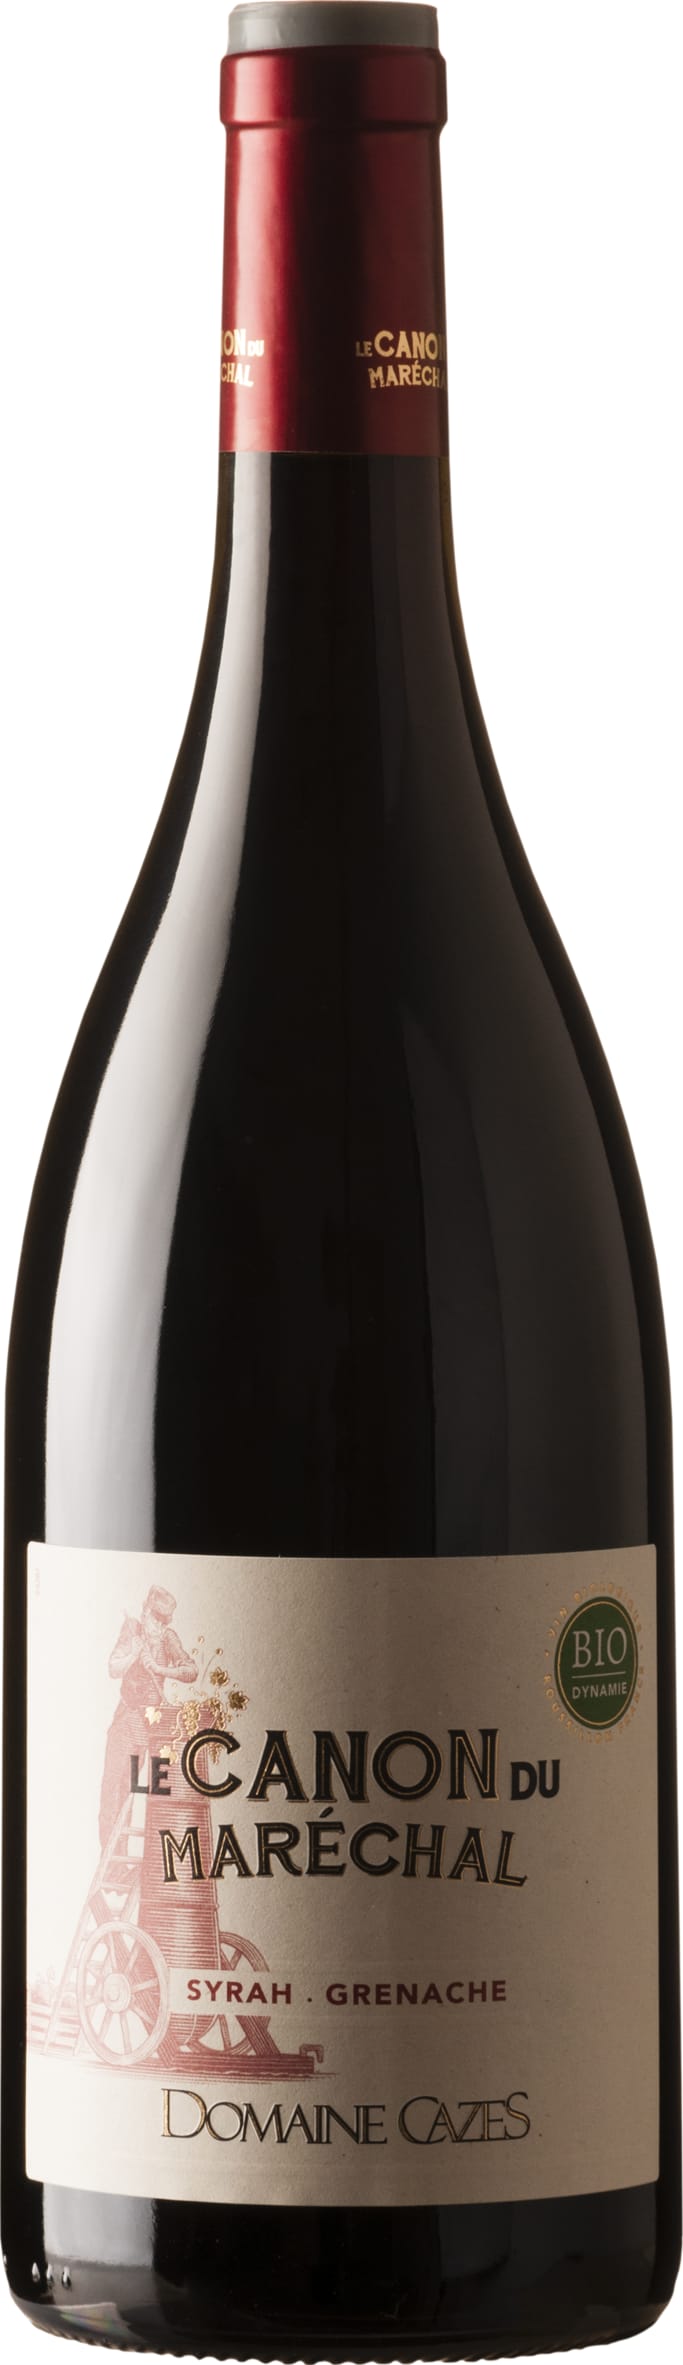 Domaine Cazes Canon du Marechal Grenache - Syrah 2022 75cl - Buy Domaine Cazes Wines from GREAT WINES DIRECT wine shop